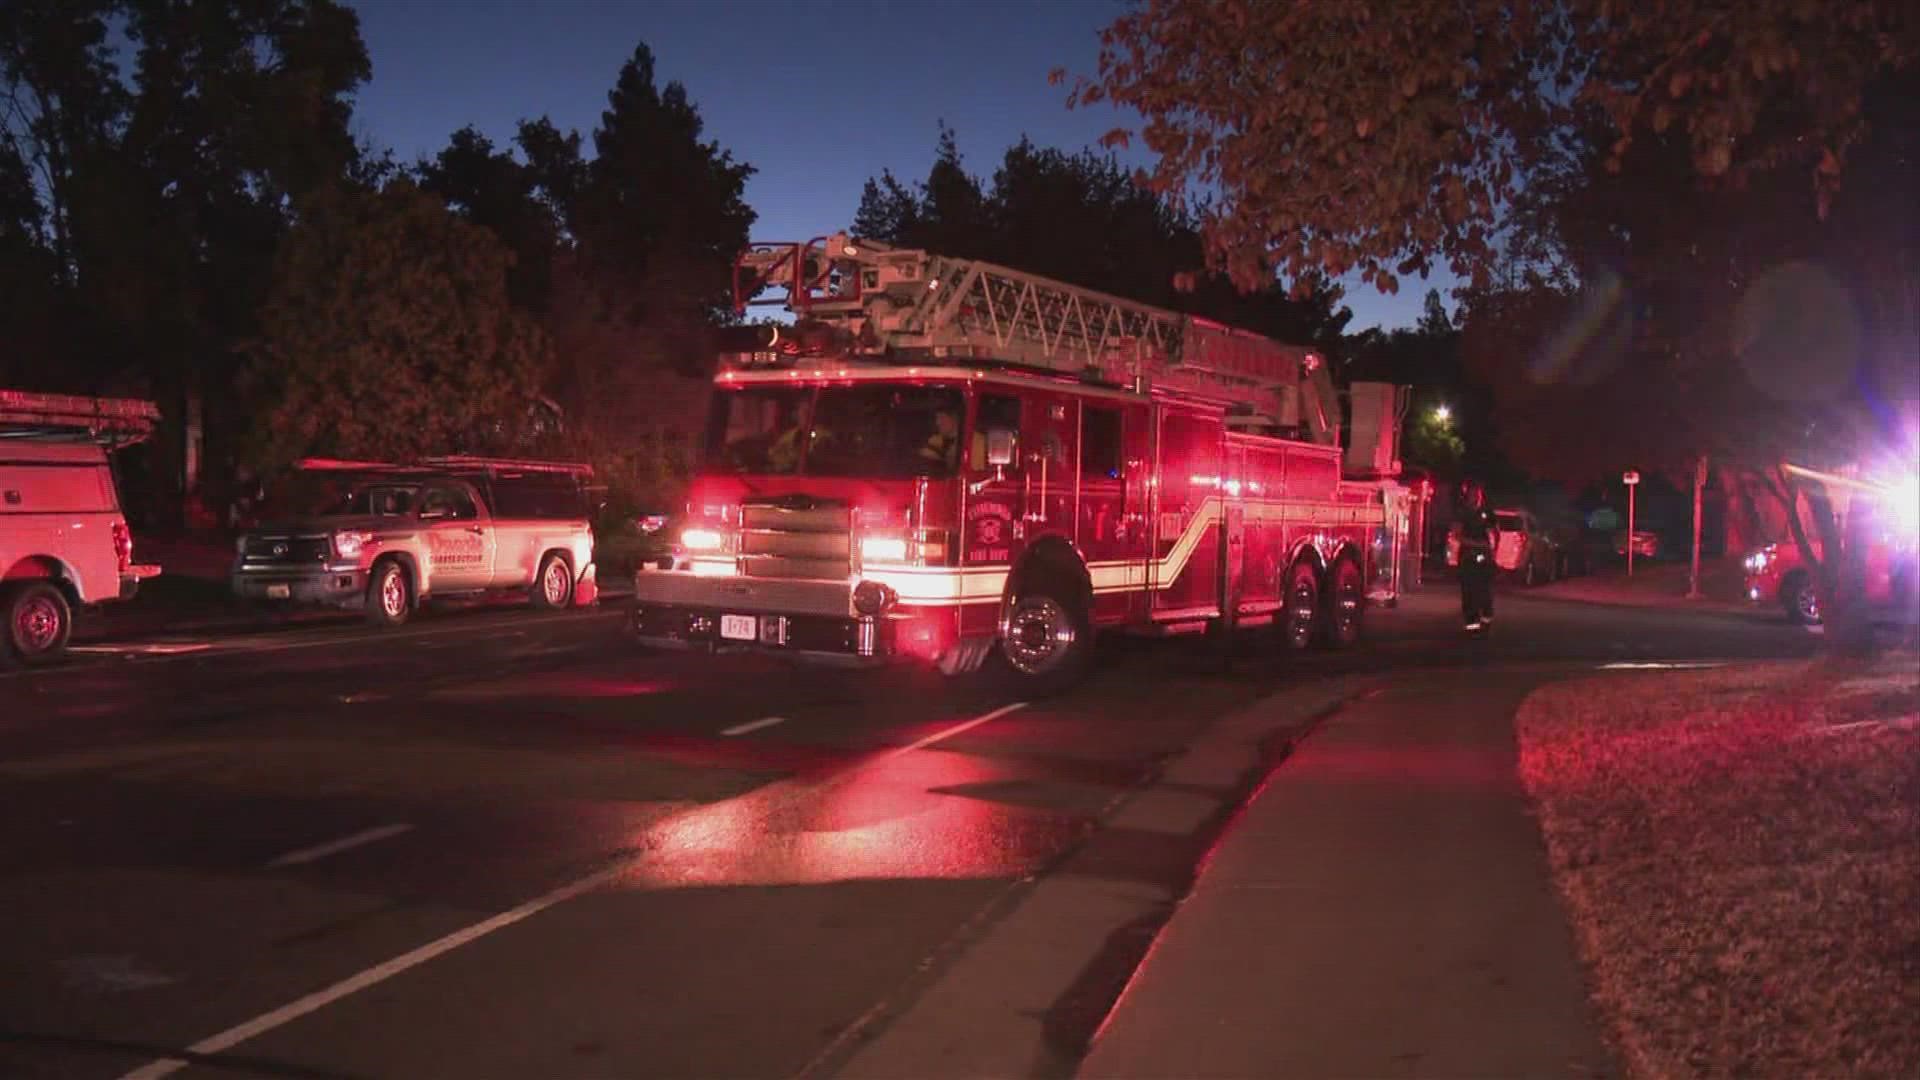 Firefighters with the Cosumnes Fire Department responded to the fire and quickly got it under control.